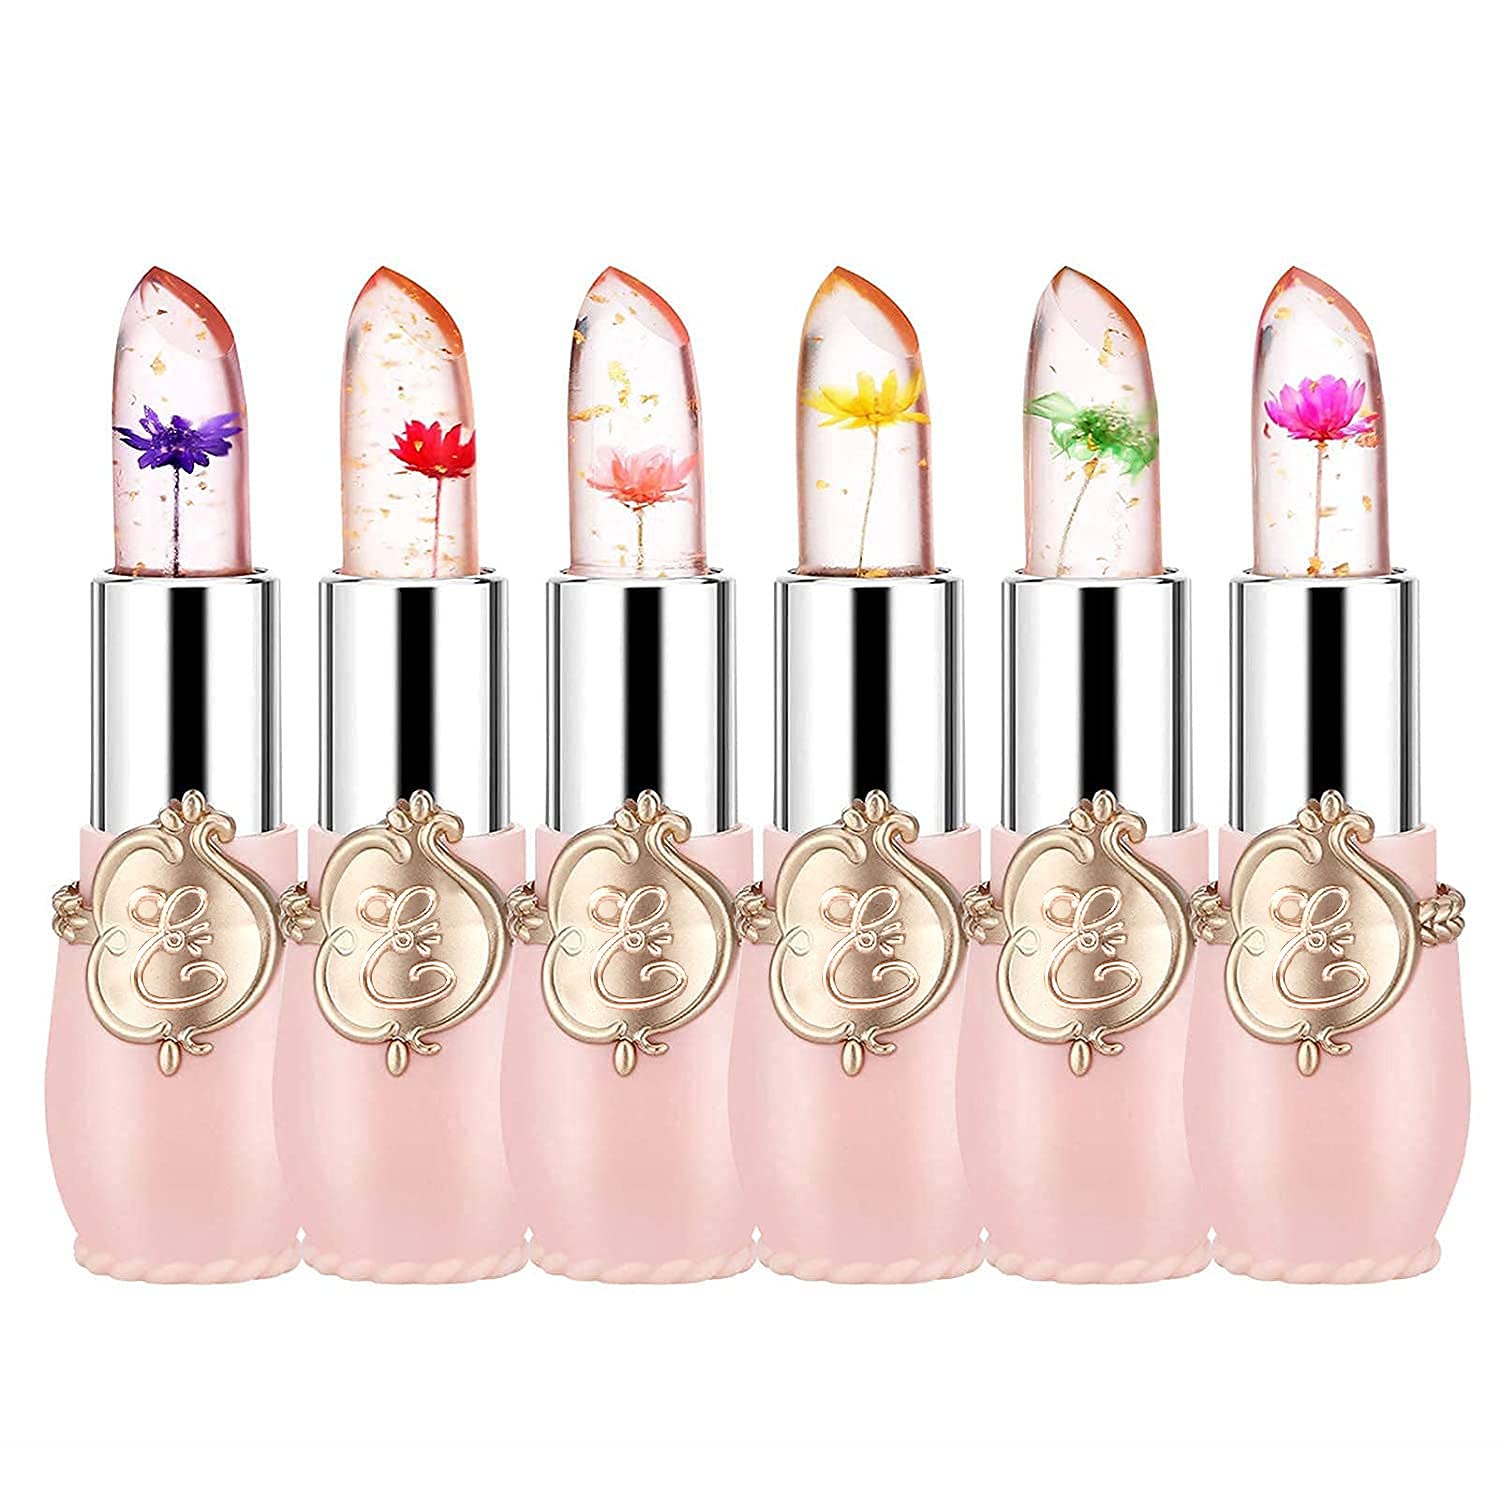 

Flower Jelly Lipstick Long Lasting Nutritious Lip Gloss Balm Lips Moisturizer Magic Temperature Color Change Wholesale Make Up, As picture